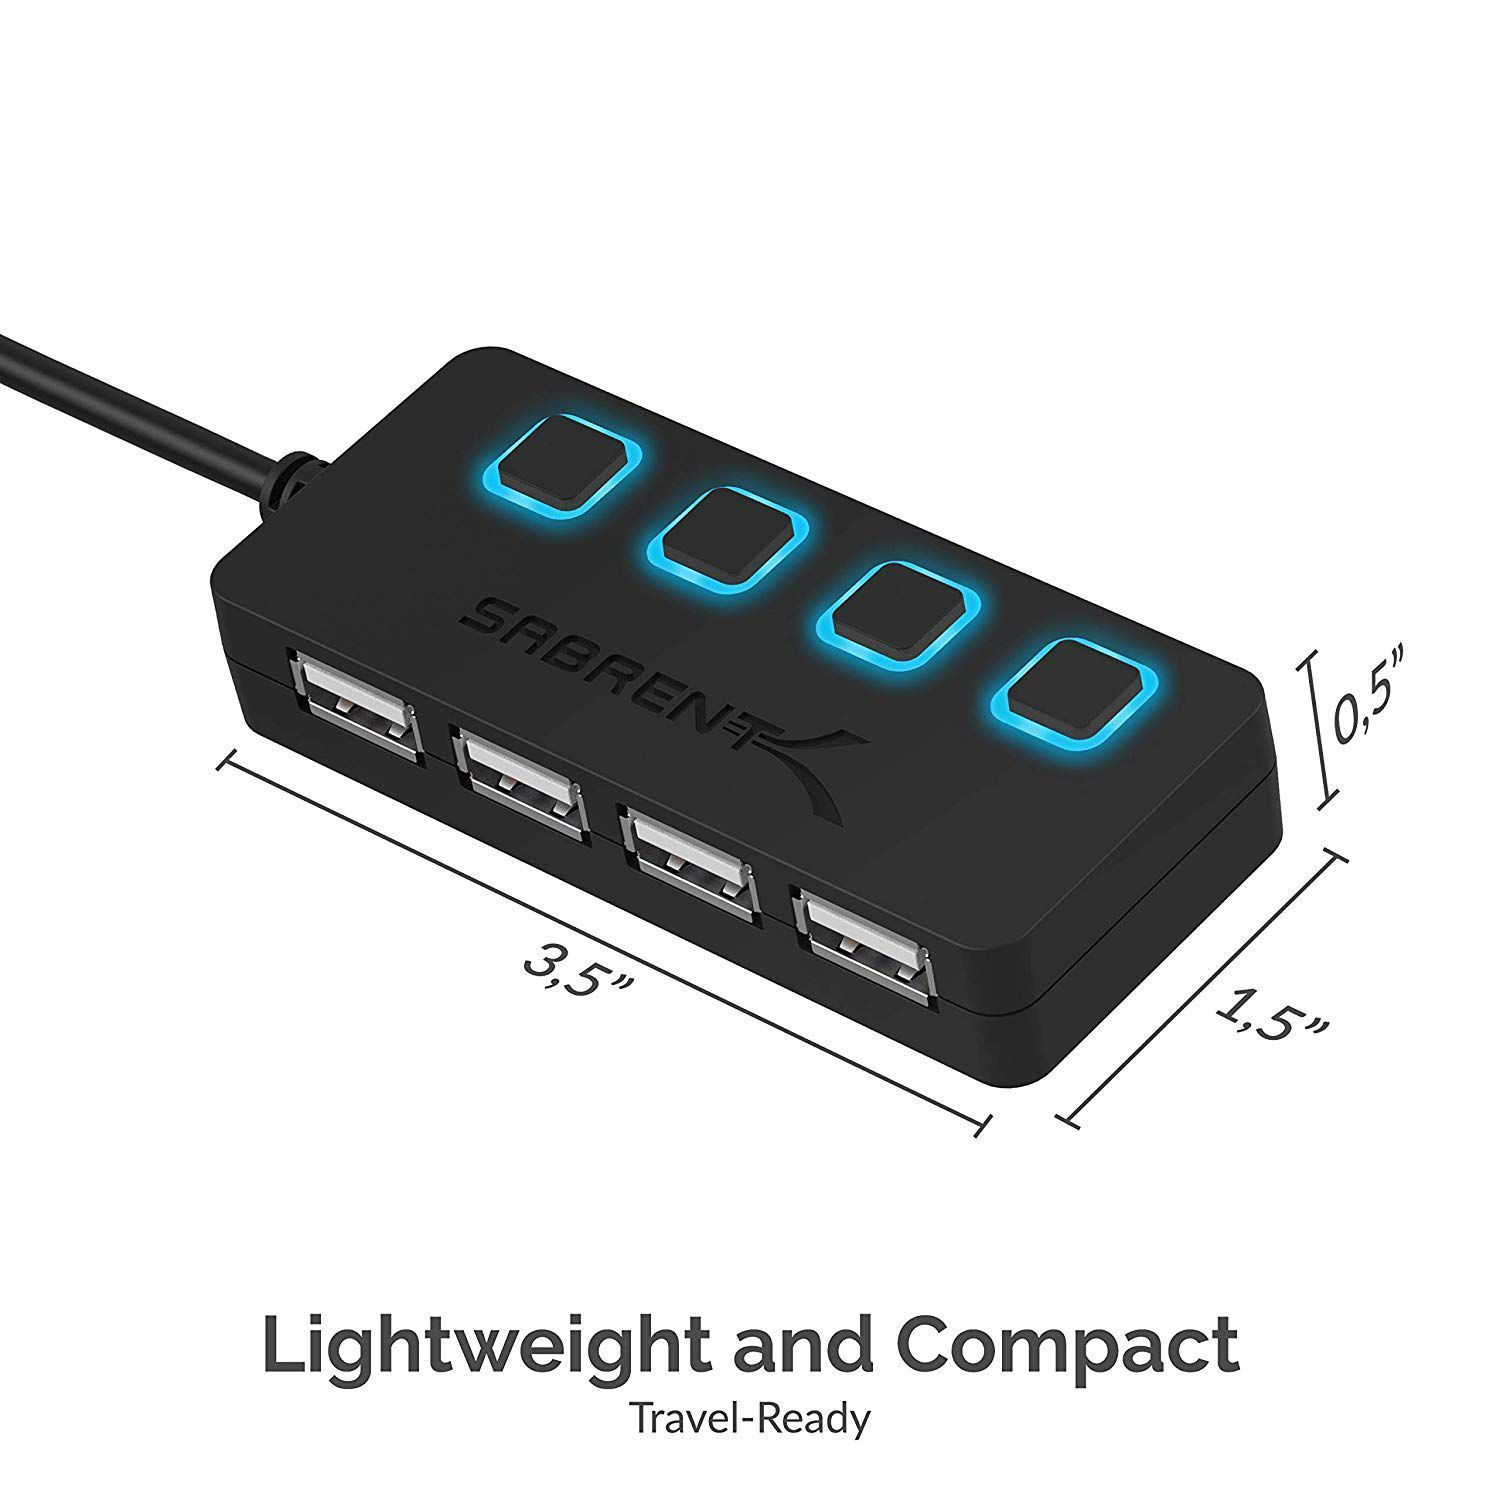 SABRENT 4 Port USB 2.0 Data Hub with Individual LED lit Power Switches [Charging NOT Supported] for Mac & PC (HB-UMLS)